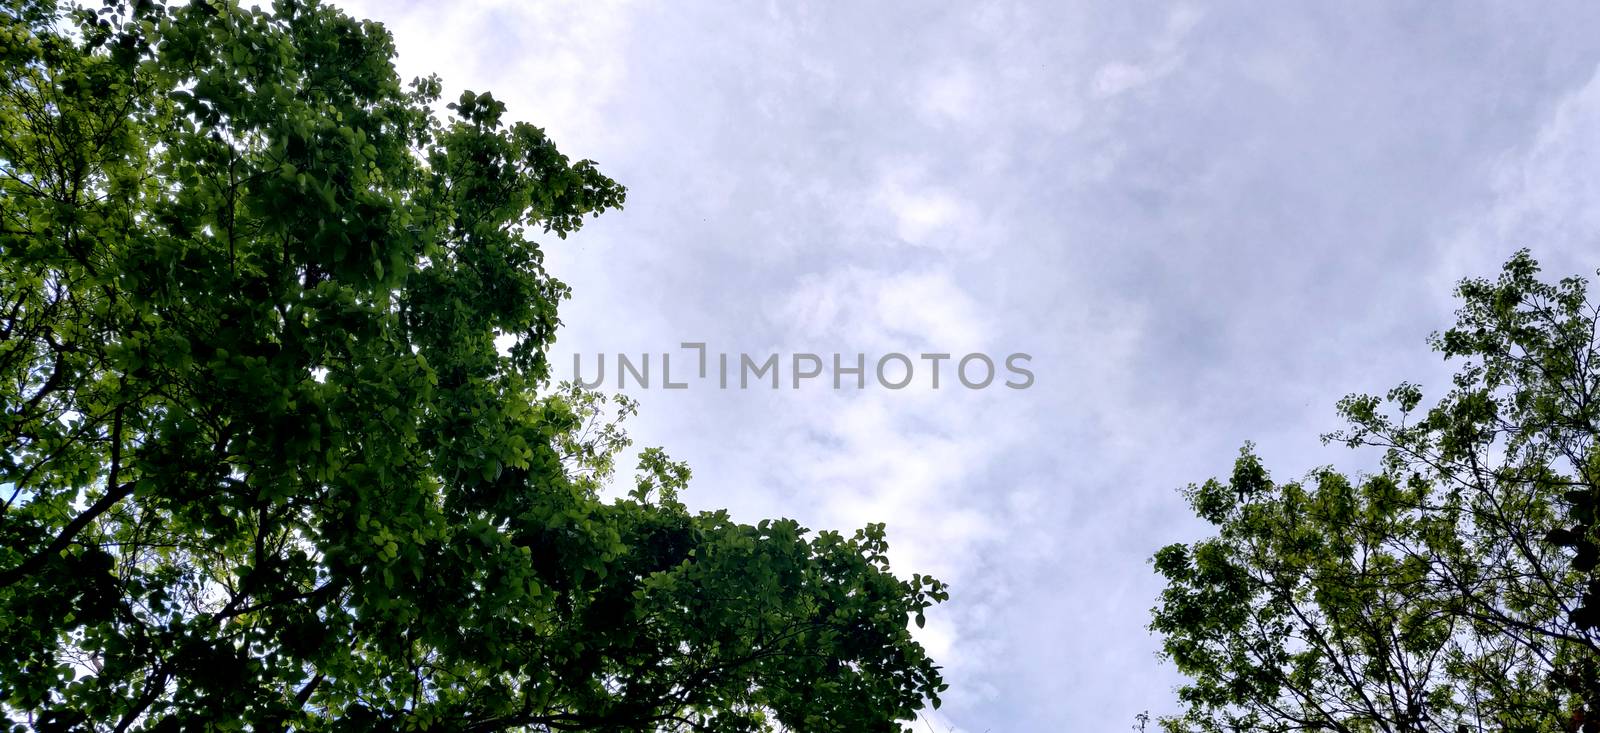 Trees and leaves on the corners in the indian summer sky filled with white clouds